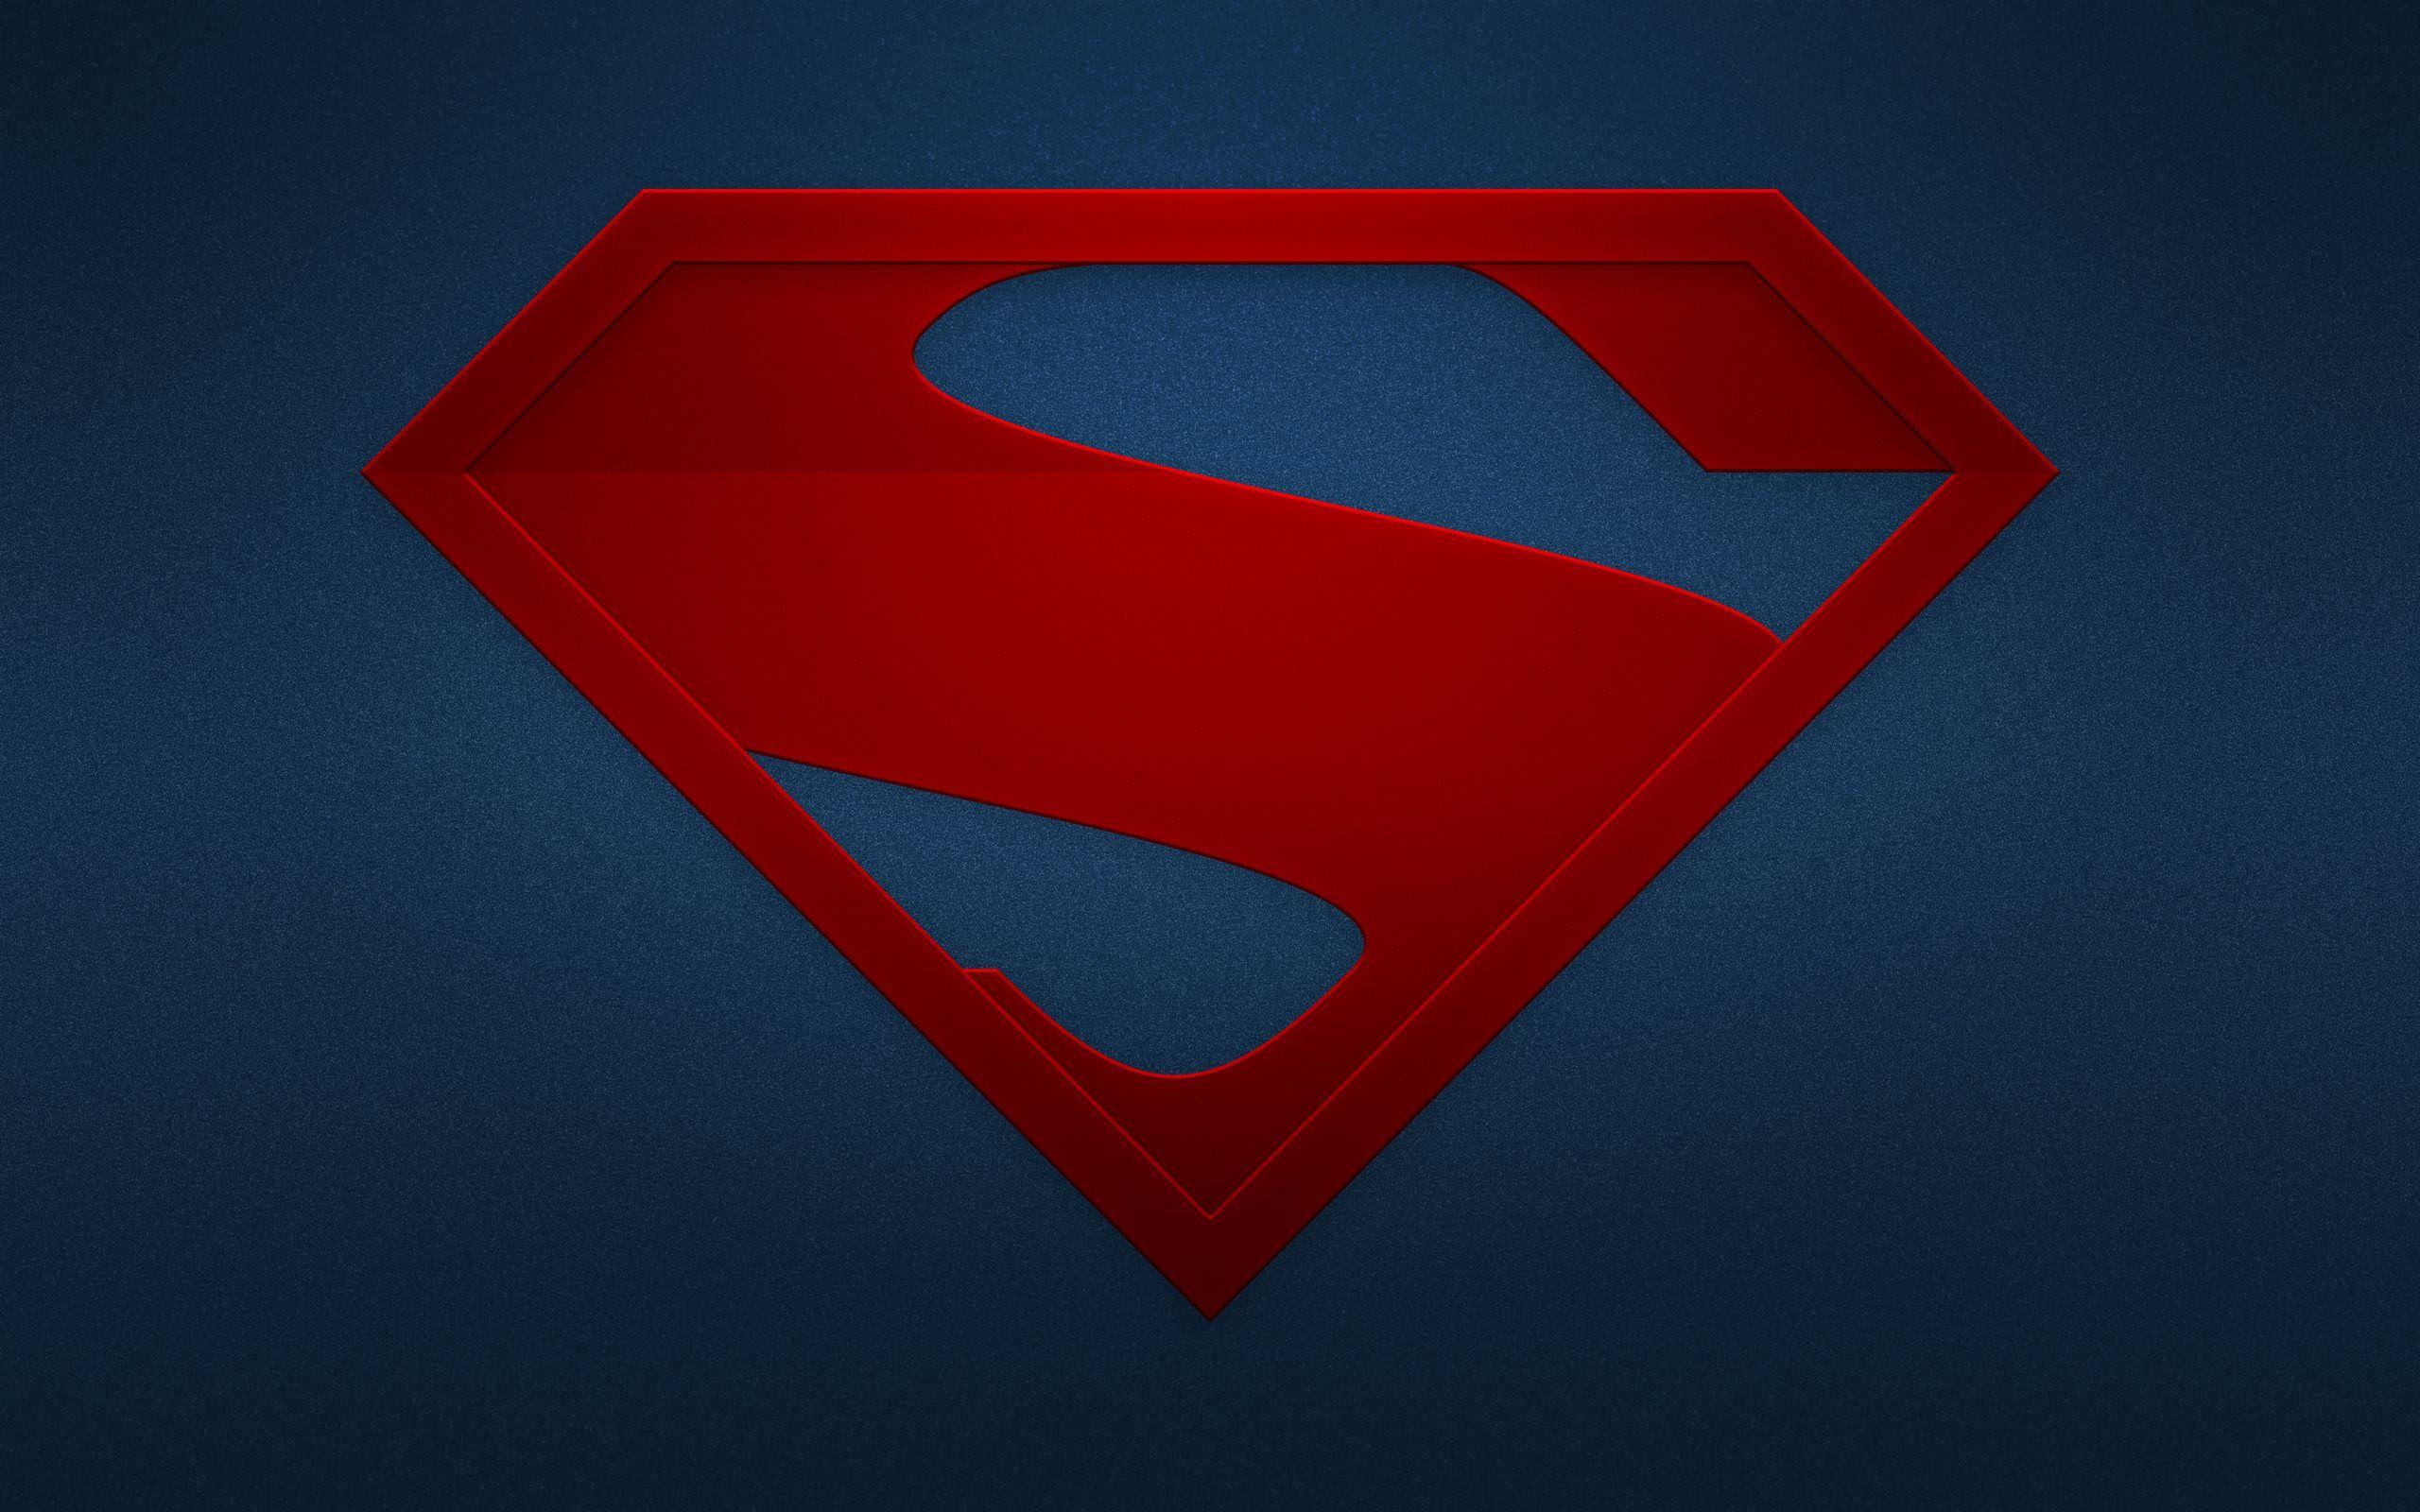 Superheroes Logos Wallpaper in HD, 4K and wide sizes